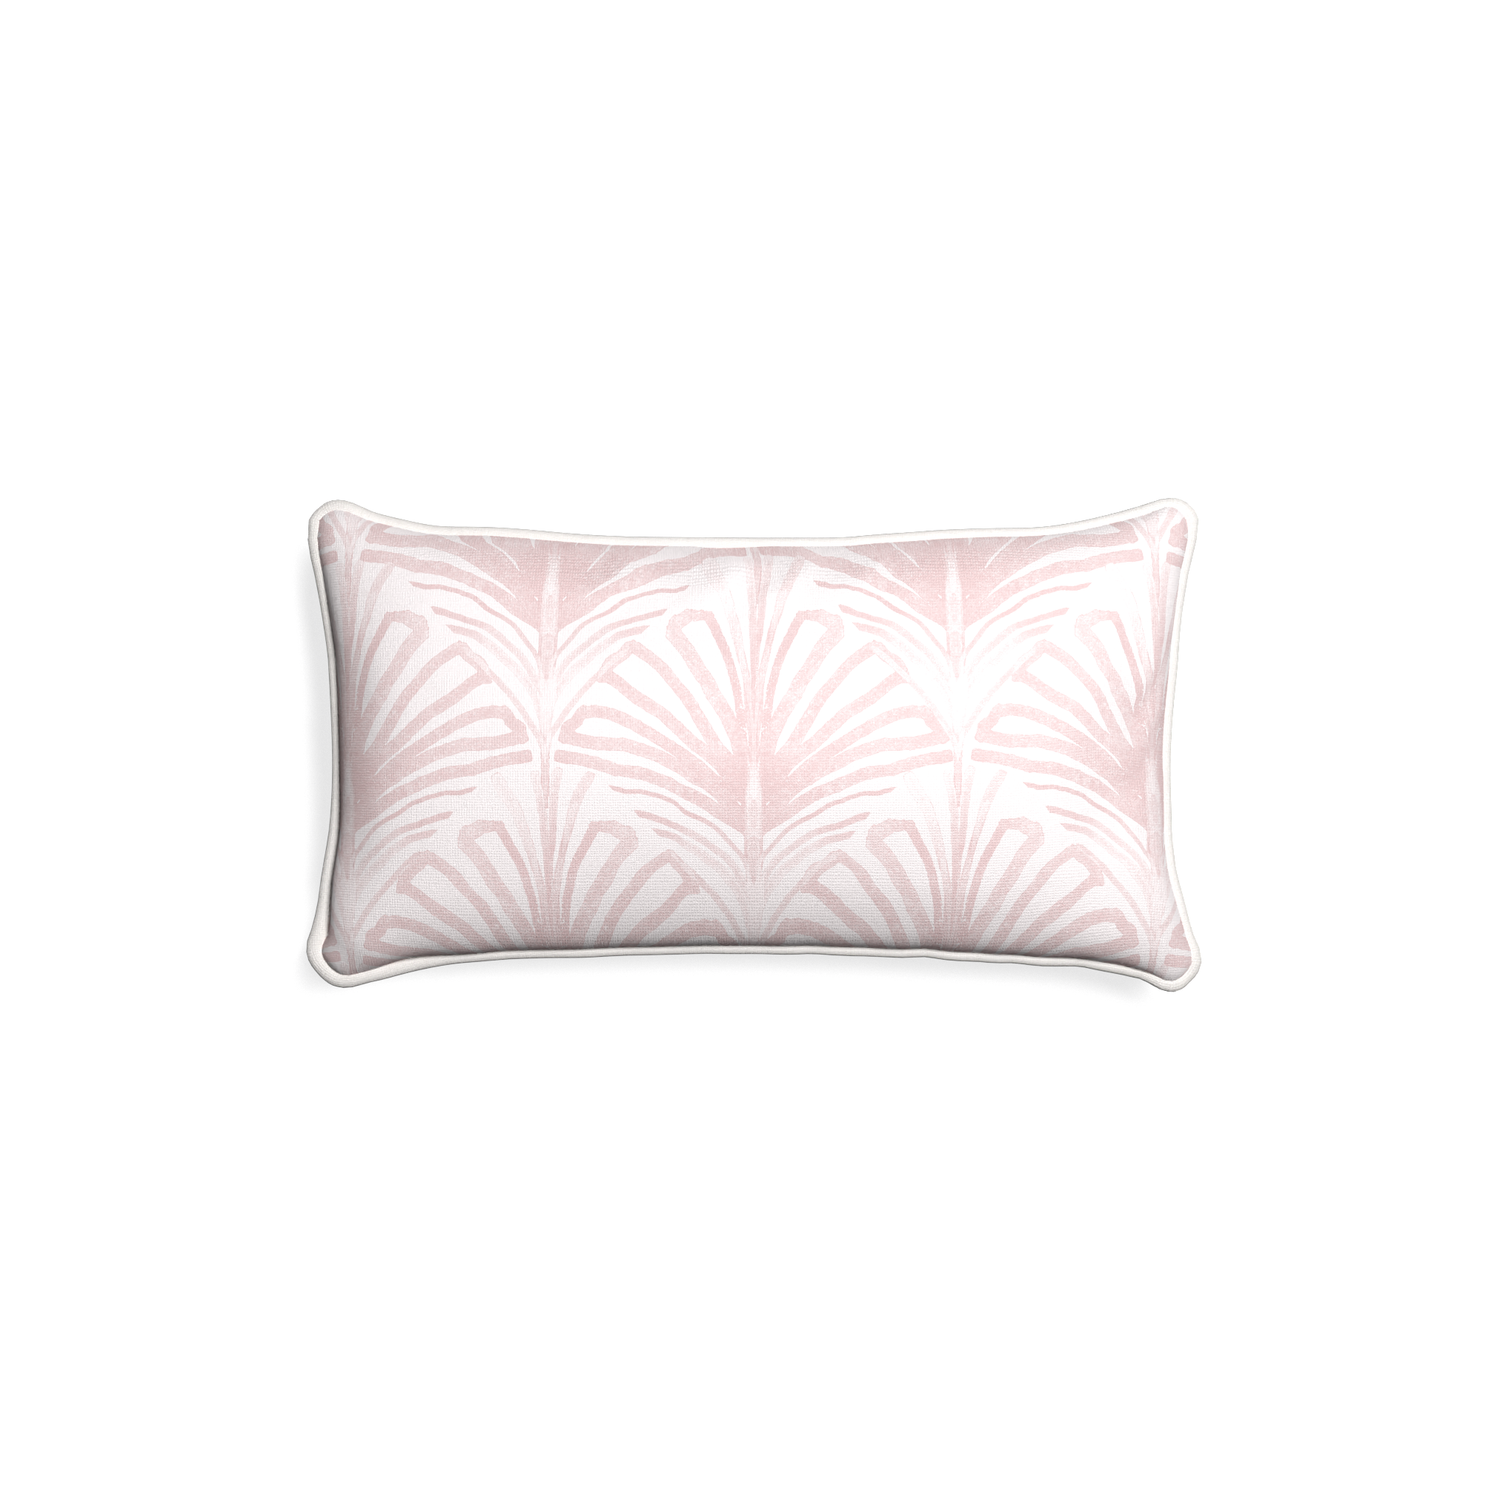 Petite-lumbar suzy rose custom rose pink palmpillow with snow piping on white background